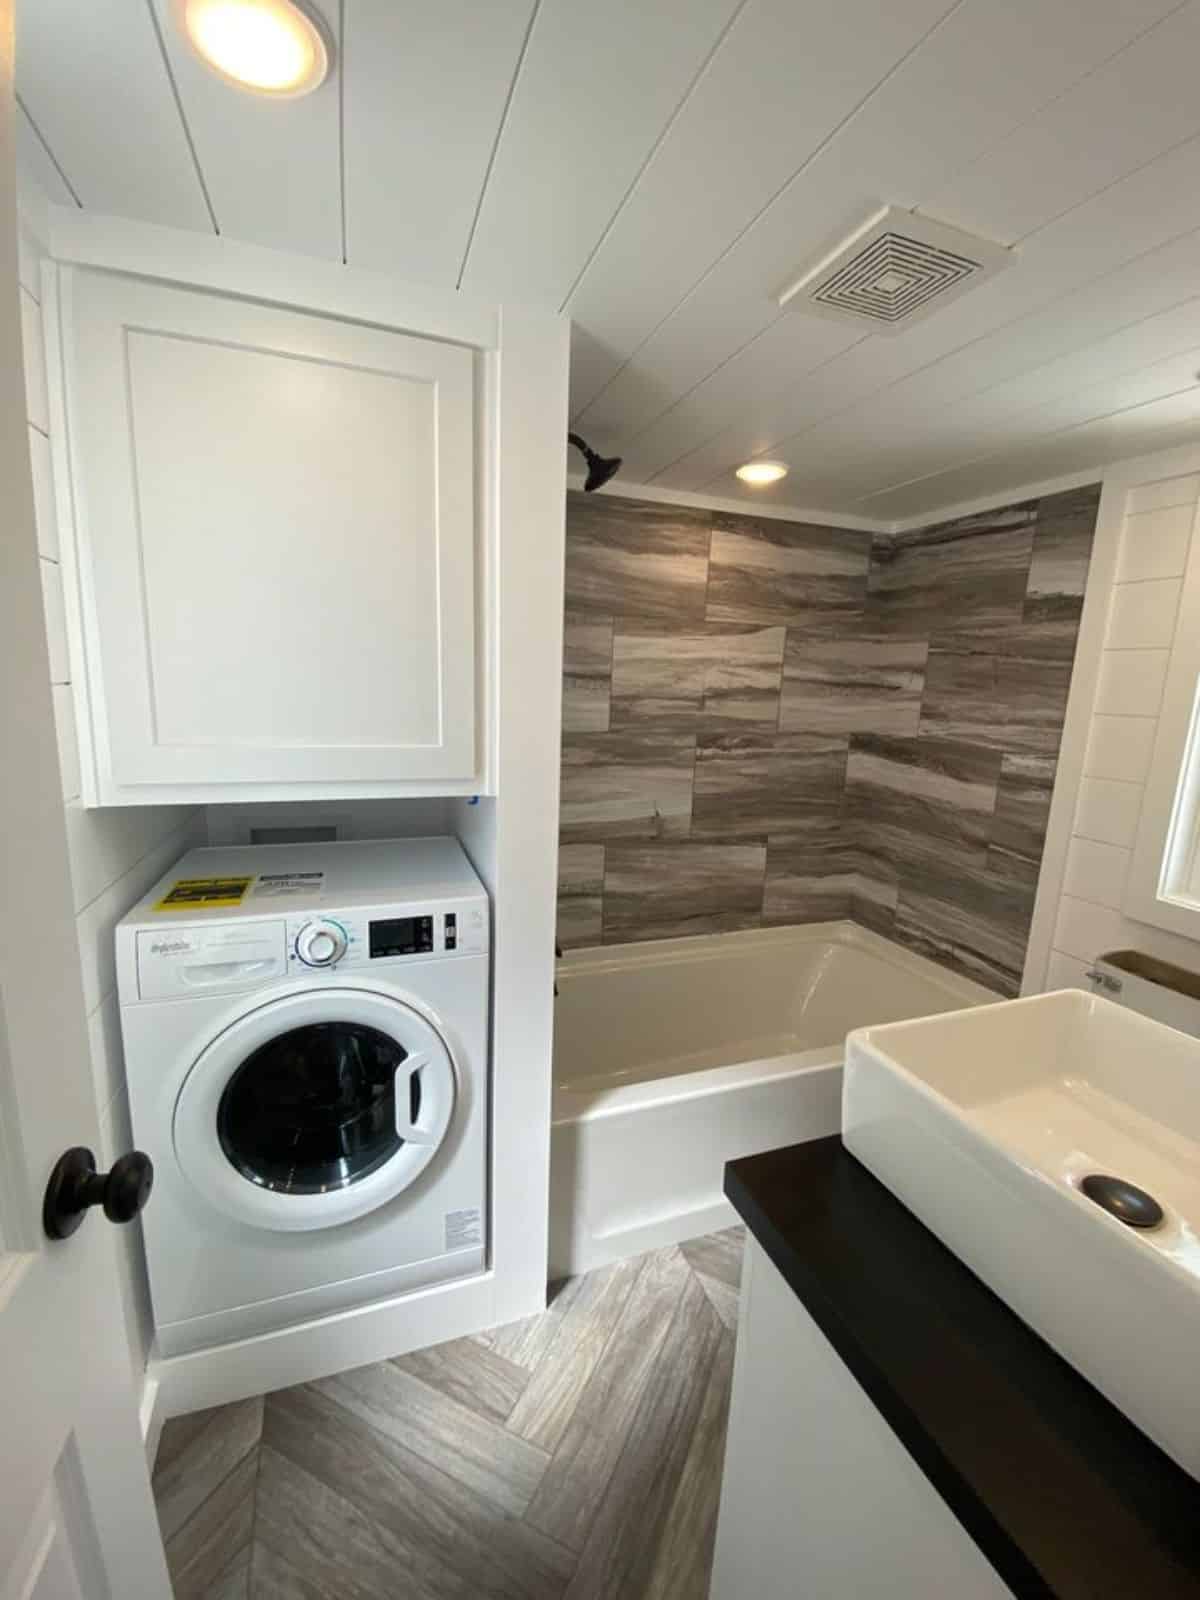 small bathtub and washer dry combo installed in the bathroom